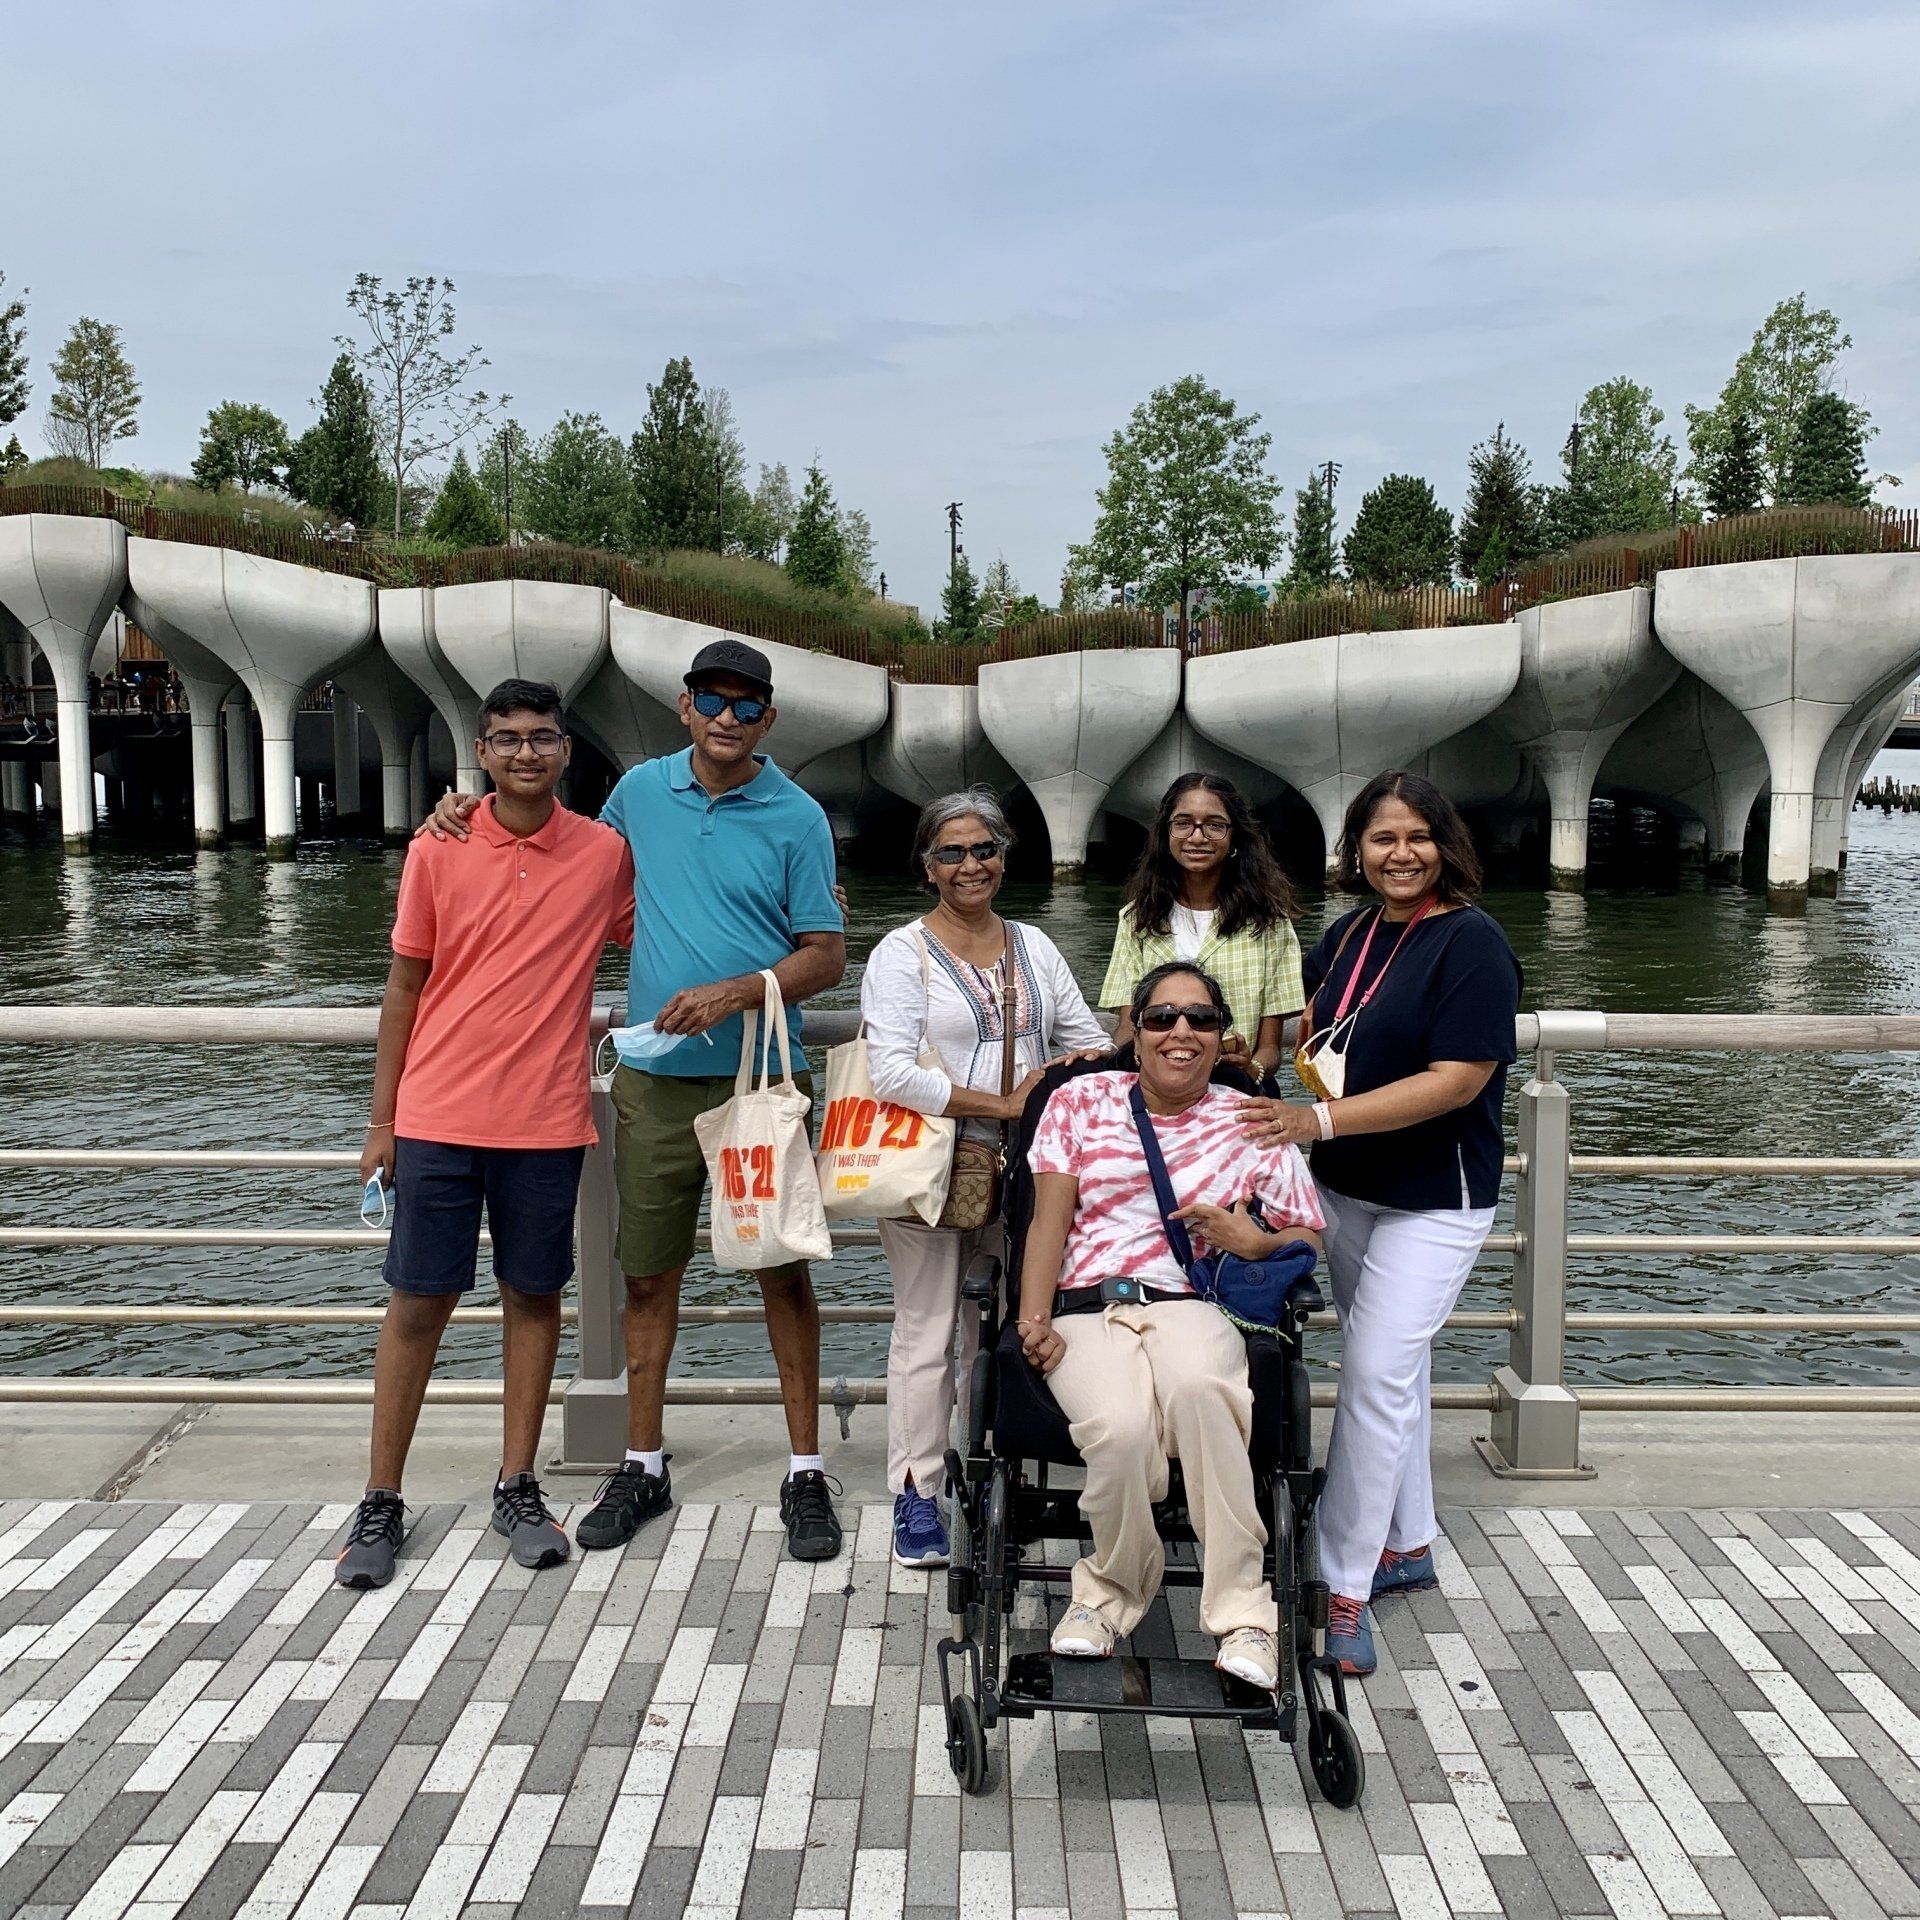 A family photo of all six of us (a brown family) standing in front of Little Island smiling for the camera. It was a cloudy, humid day so the photo is a bit on the grayish side of color.Wheelchair Accessible Travel NYC